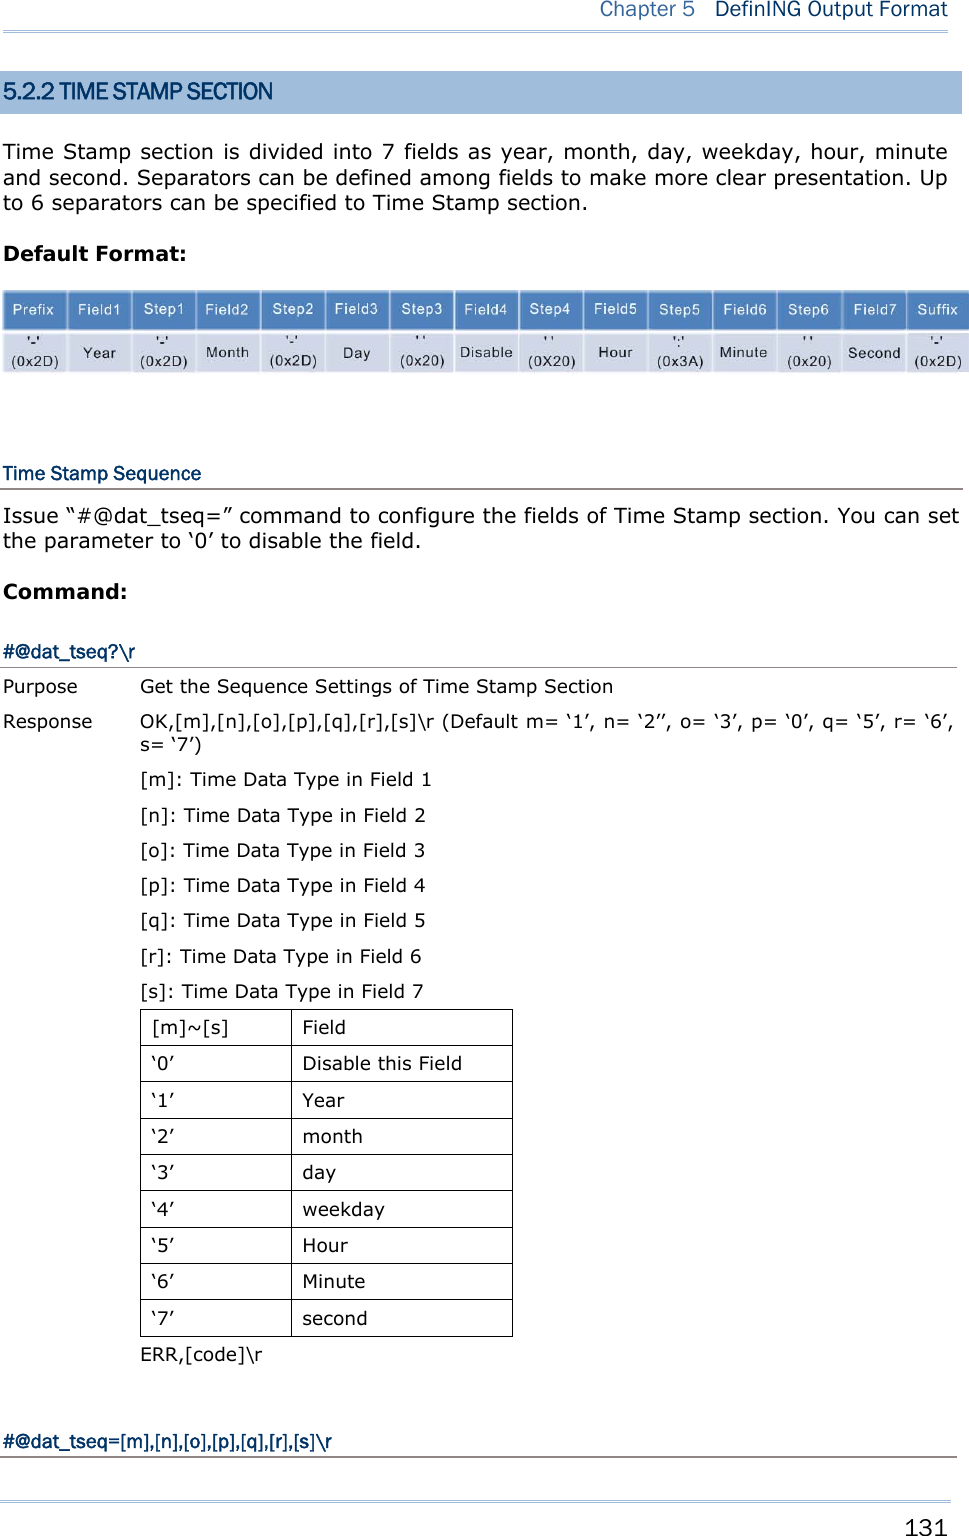     131  Chapter 5  DefinING Output Format  5.2.2 TIME STAMP SECTION Time Stamp section is divided into 7 fields as year, month, day, weekday, hour, minute and second. Separators can be defined among fields to make more clear presentation. Up to 6 separators can be specified to Time Stamp section.   Default Format:   Time Stamp Sequence Issue “#@dat_tseq=” command to configure the fields of Time Stamp section. You can set the parameter to ‘0’ to disable the field.   Command: #@dat_tseq?\r  Purpose  Get the Sequence Settings of Time Stamp Section Response  OK,[m],[n],[o],[p],[q],[r],[s]\r (Default m= ‘1’, n= ‘2’’, o= ‘3’, p= ‘0’, q= ‘5’, r= ‘6’, s= ‘7’)   [m]: Time Data Type in Field 1 [n]: Time Data Type in Field 2 [o]: Time Data Type in Field 3 [p]: Time Data Type in Field 4 [q]: Time Data Type in Field 5 [r]: Time Data Type in Field 6 [s]: Time Data Type in Field 7 [m]~[s] Field ‘0’    Disable this Field ‘1’ Year ‘2’ month ‘3’ day ‘4’   weekday ‘5’ Hour ‘6’ Minute ‘7’ second ERR,[code]\r  #@dat_tseq=[m],[n],[o],[p],[q],[r],[s]\r  